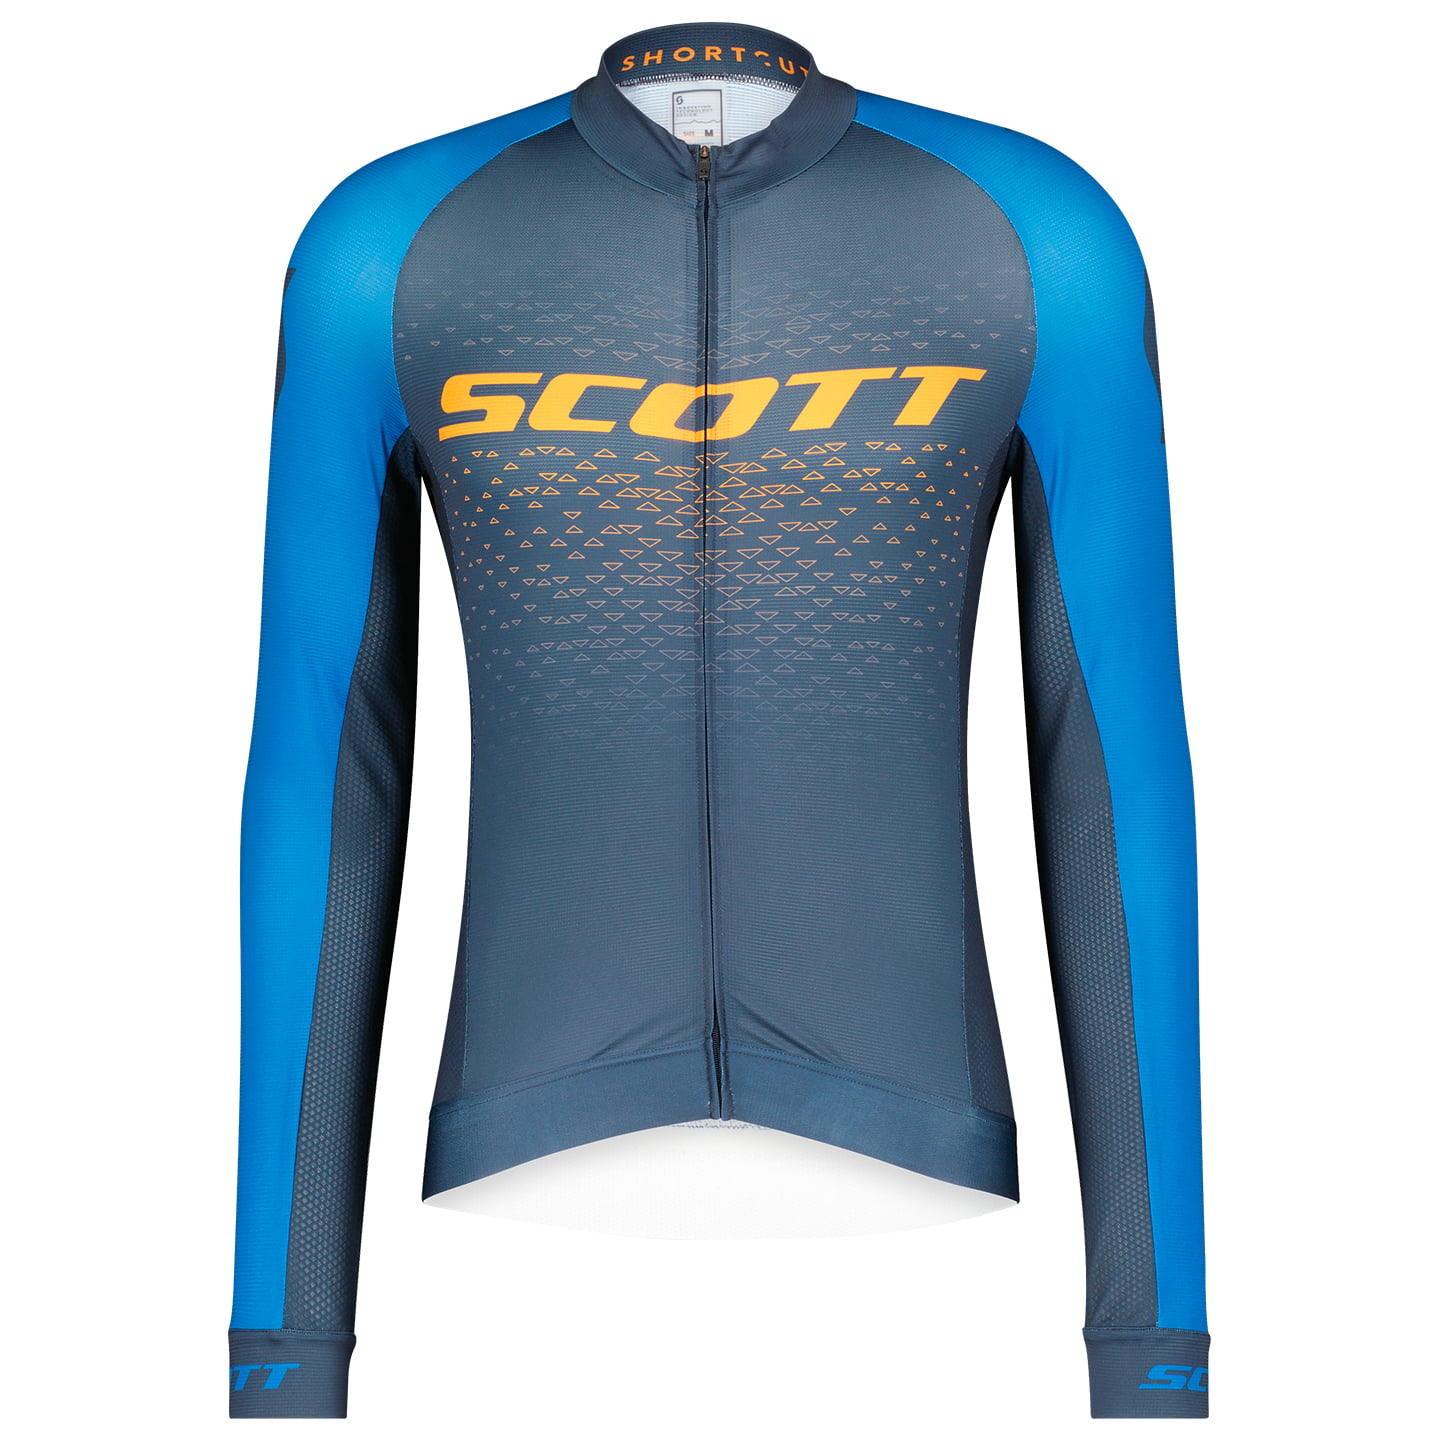 SCOTT RC Pro Long Sleeve Jersey Long Sleeve Jersey, for men, size XL, Cycling jersey, Cycle clothing